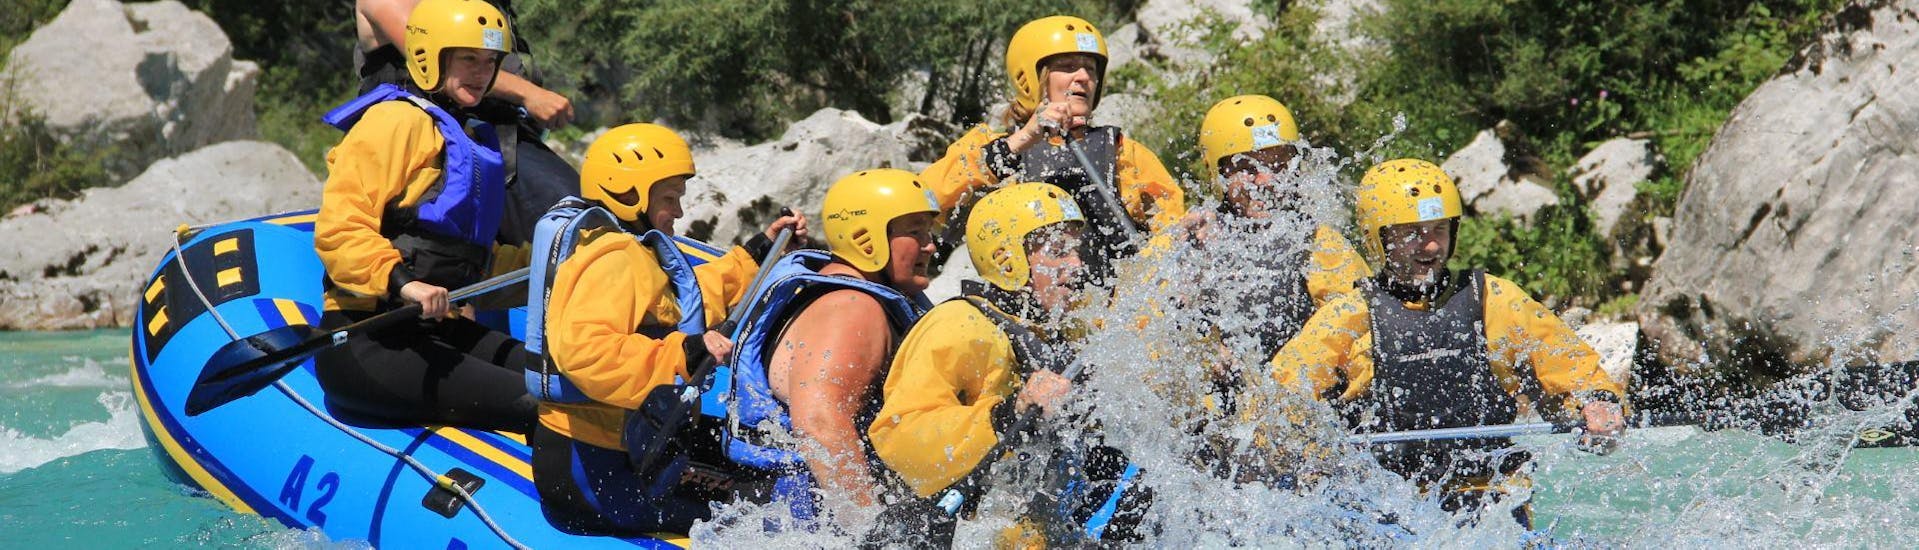 A group during the rafting on the Soča River - Go 2 Action Tour with A2 Rafting Kobarid